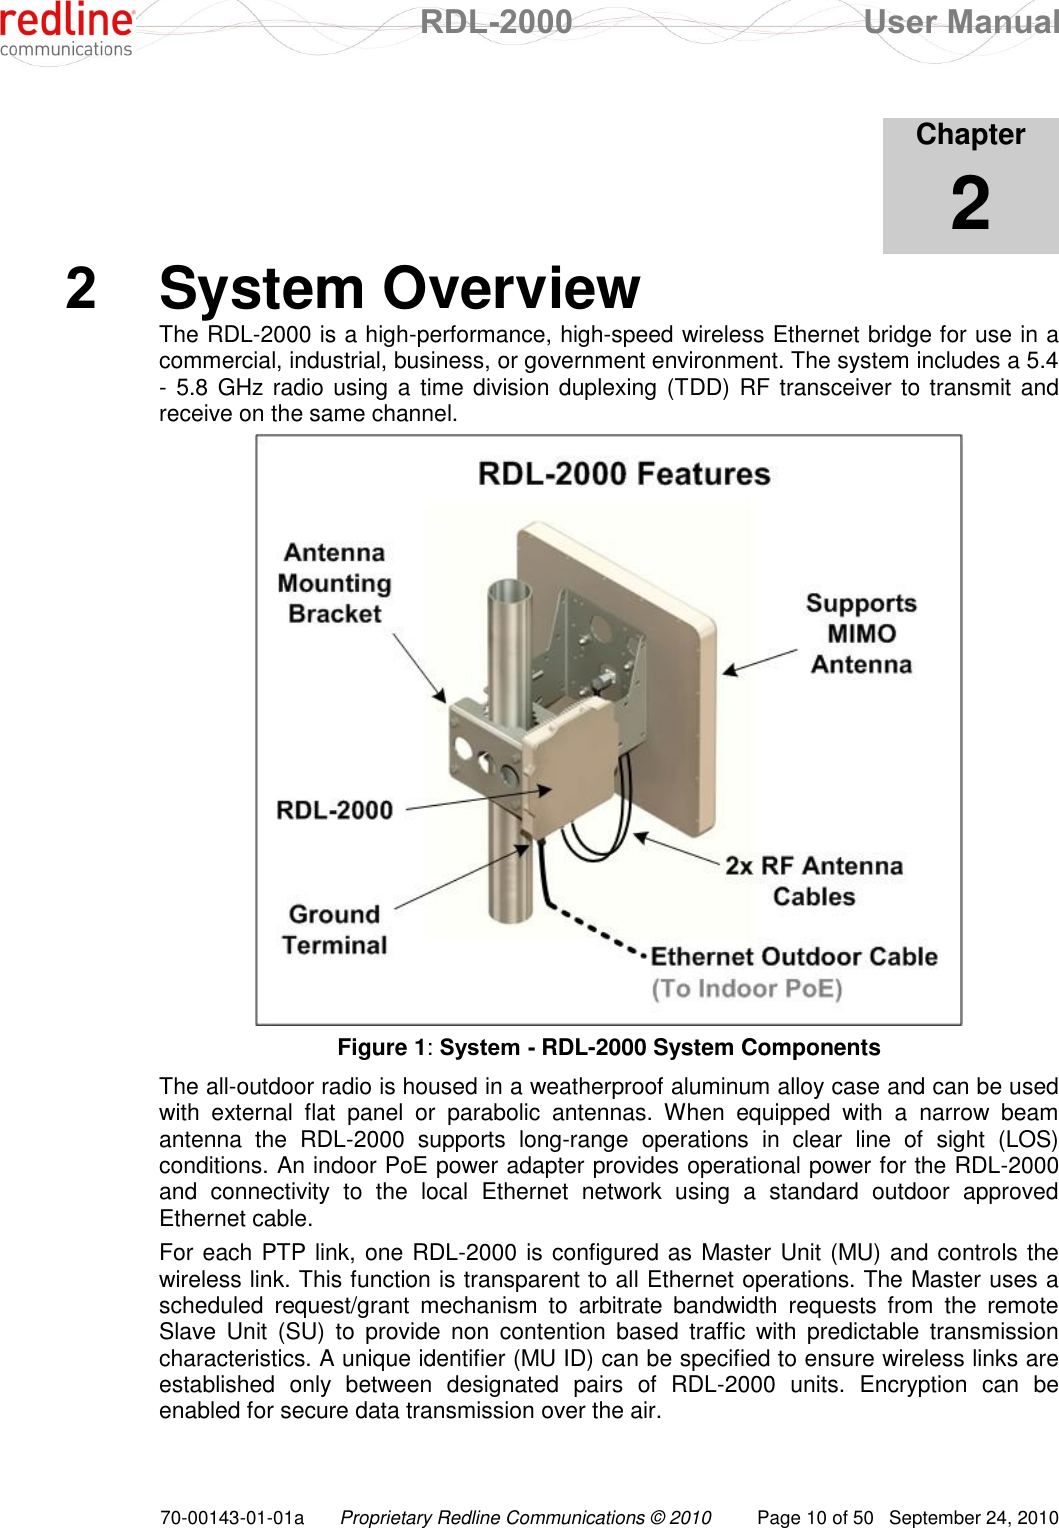  RDL-2000  User Manual 70-00143-01-01a Proprietary Redline Communications © 2010  Page 10 of 50  September 24, 2010            Chapter 2 2  System Overview The RDL-2000 is a high-performance, high-speed wireless Ethernet bridge for use in a commercial, industrial, business, or government environment. The system includes a 5.4 - 5.8  GHz radio using a time division duplexing (TDD) RF transceiver to transmit and receive on the same channel.  Figure 1: System - RDL-2000 System Components The all-outdoor radio is housed in a weatherproof aluminum alloy case and can be used with  external  flat  panel  or  parabolic  antennas.  When  equipped  with  a  narrow  beam antenna  the  RDL-2000  supports  long-range  operations  in  clear  line  of  sight  (LOS) conditions. An indoor PoE power adapter provides operational power for the RDL-2000 and  connectivity  to  the  local  Ethernet  network  using  a  standard  outdoor  approved Ethernet cable. For each PTP link, one RDL-2000 is configured as Master Unit (MU) and controls the wireless link. This function is transparent to all Ethernet operations. The Master uses a scheduled  request/grant  mechanism  to  arbitrate  bandwidth  requests  from  the  remote Slave  Unit  (SU)  to  provide  non  contention  based  traffic  with  predictable  transmission characteristics. A unique identifier (MU ID) can be specified to ensure wireless links are established  only  between  designated  pairs  of  RDL-2000  units.  Encryption  can  be enabled for secure data transmission over the air. 